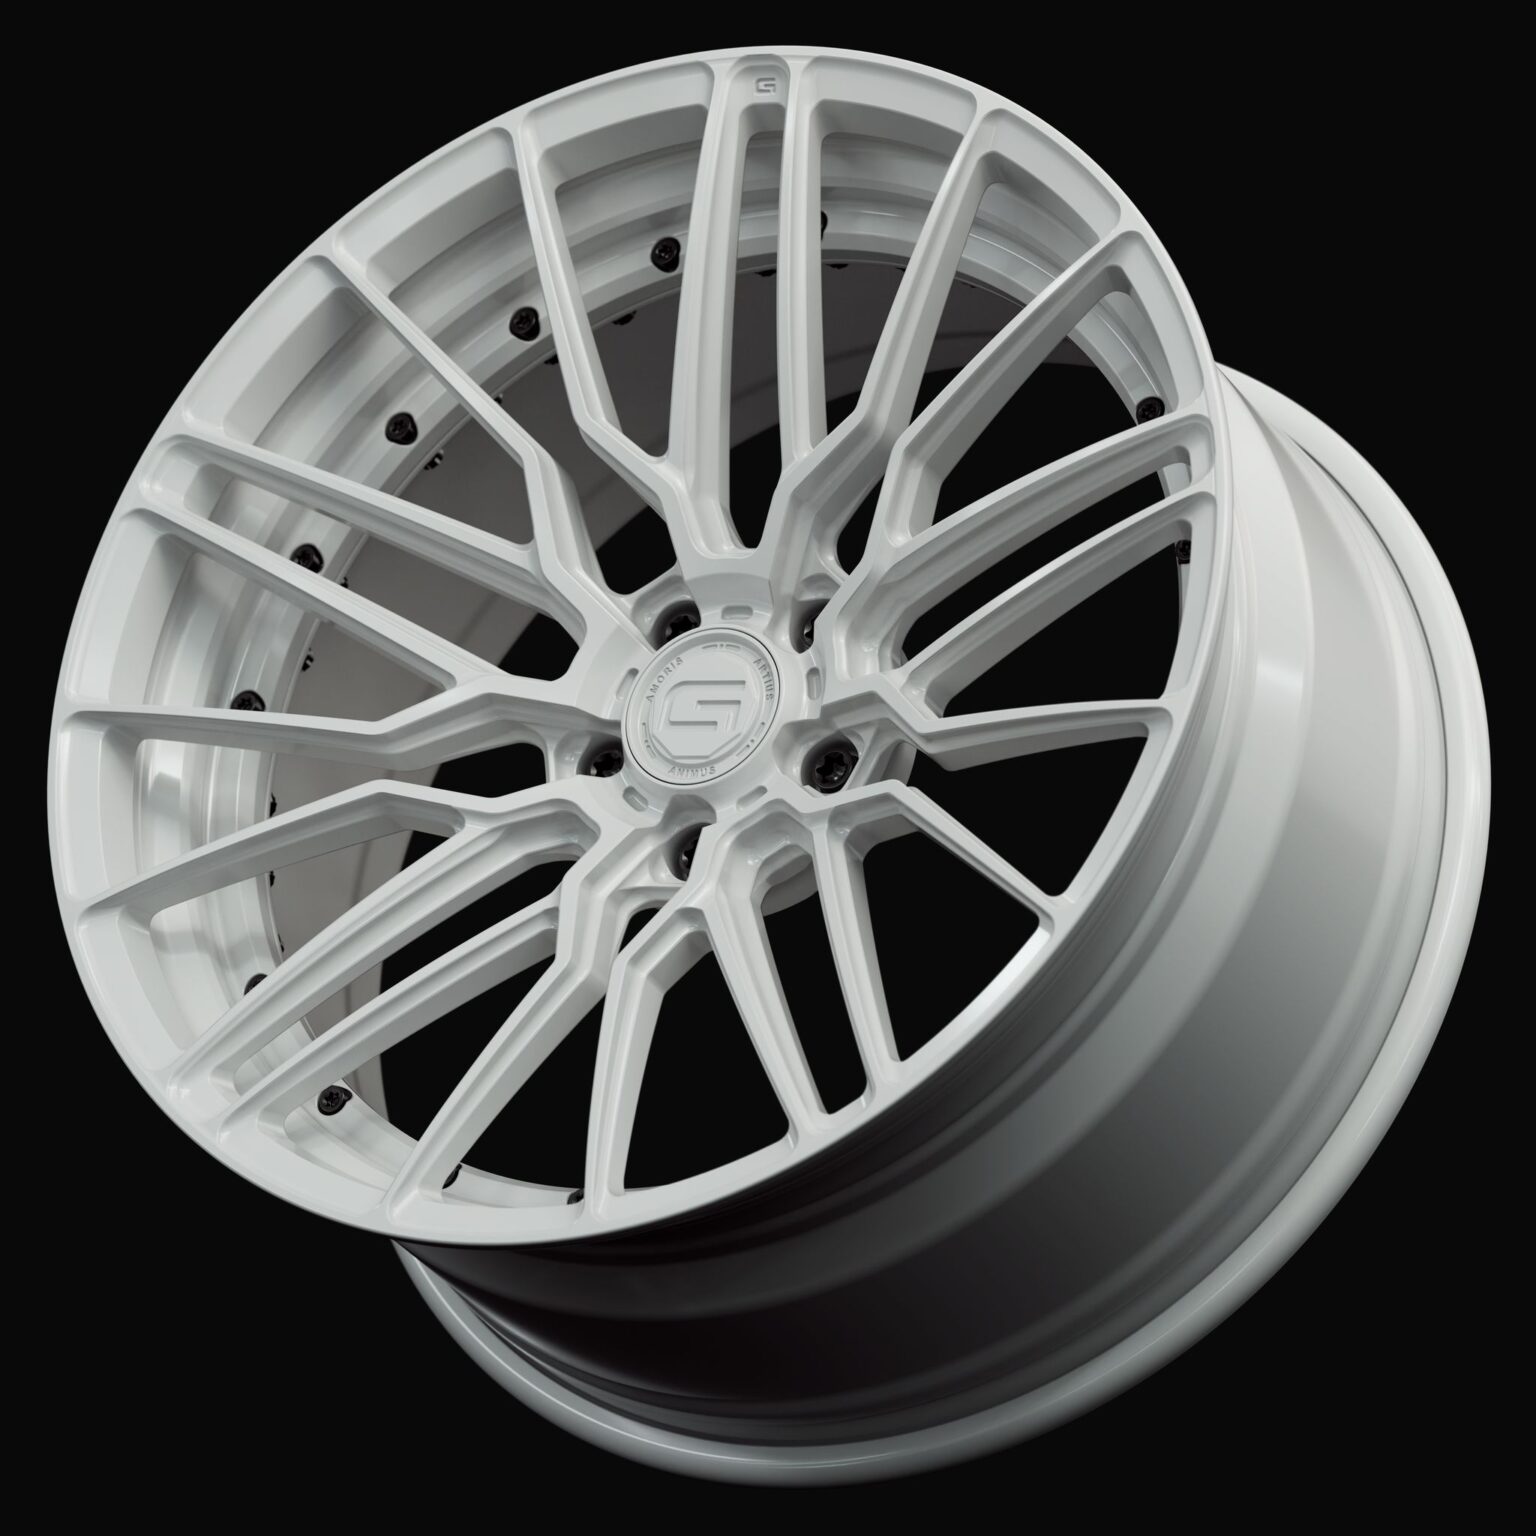 Three-quarter view of a white G57 duoblock wheel from Govad Forged Track series